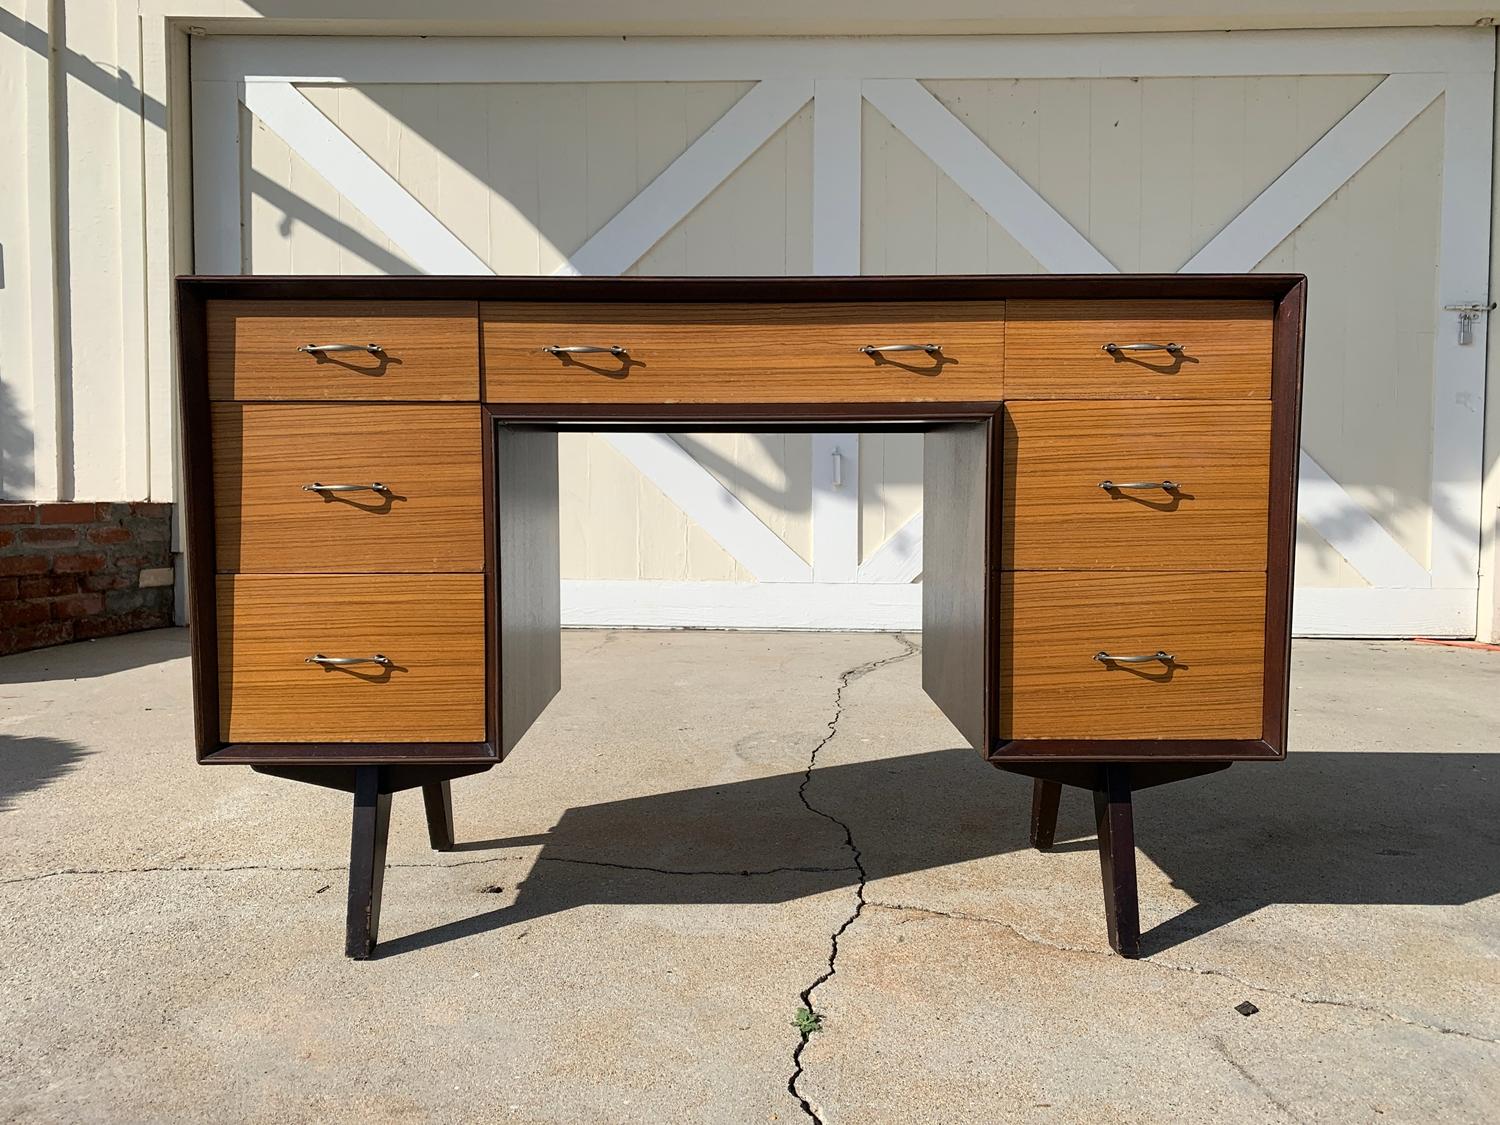 Beautiful compact desk from the 1940s-1950s with 7 drawers and beautiful arquitectural lines.
The piece has beautiful joinery on the drawers and legs, the contrast in colors of the drawers and rest of the desk is really quite stunning.

The piece